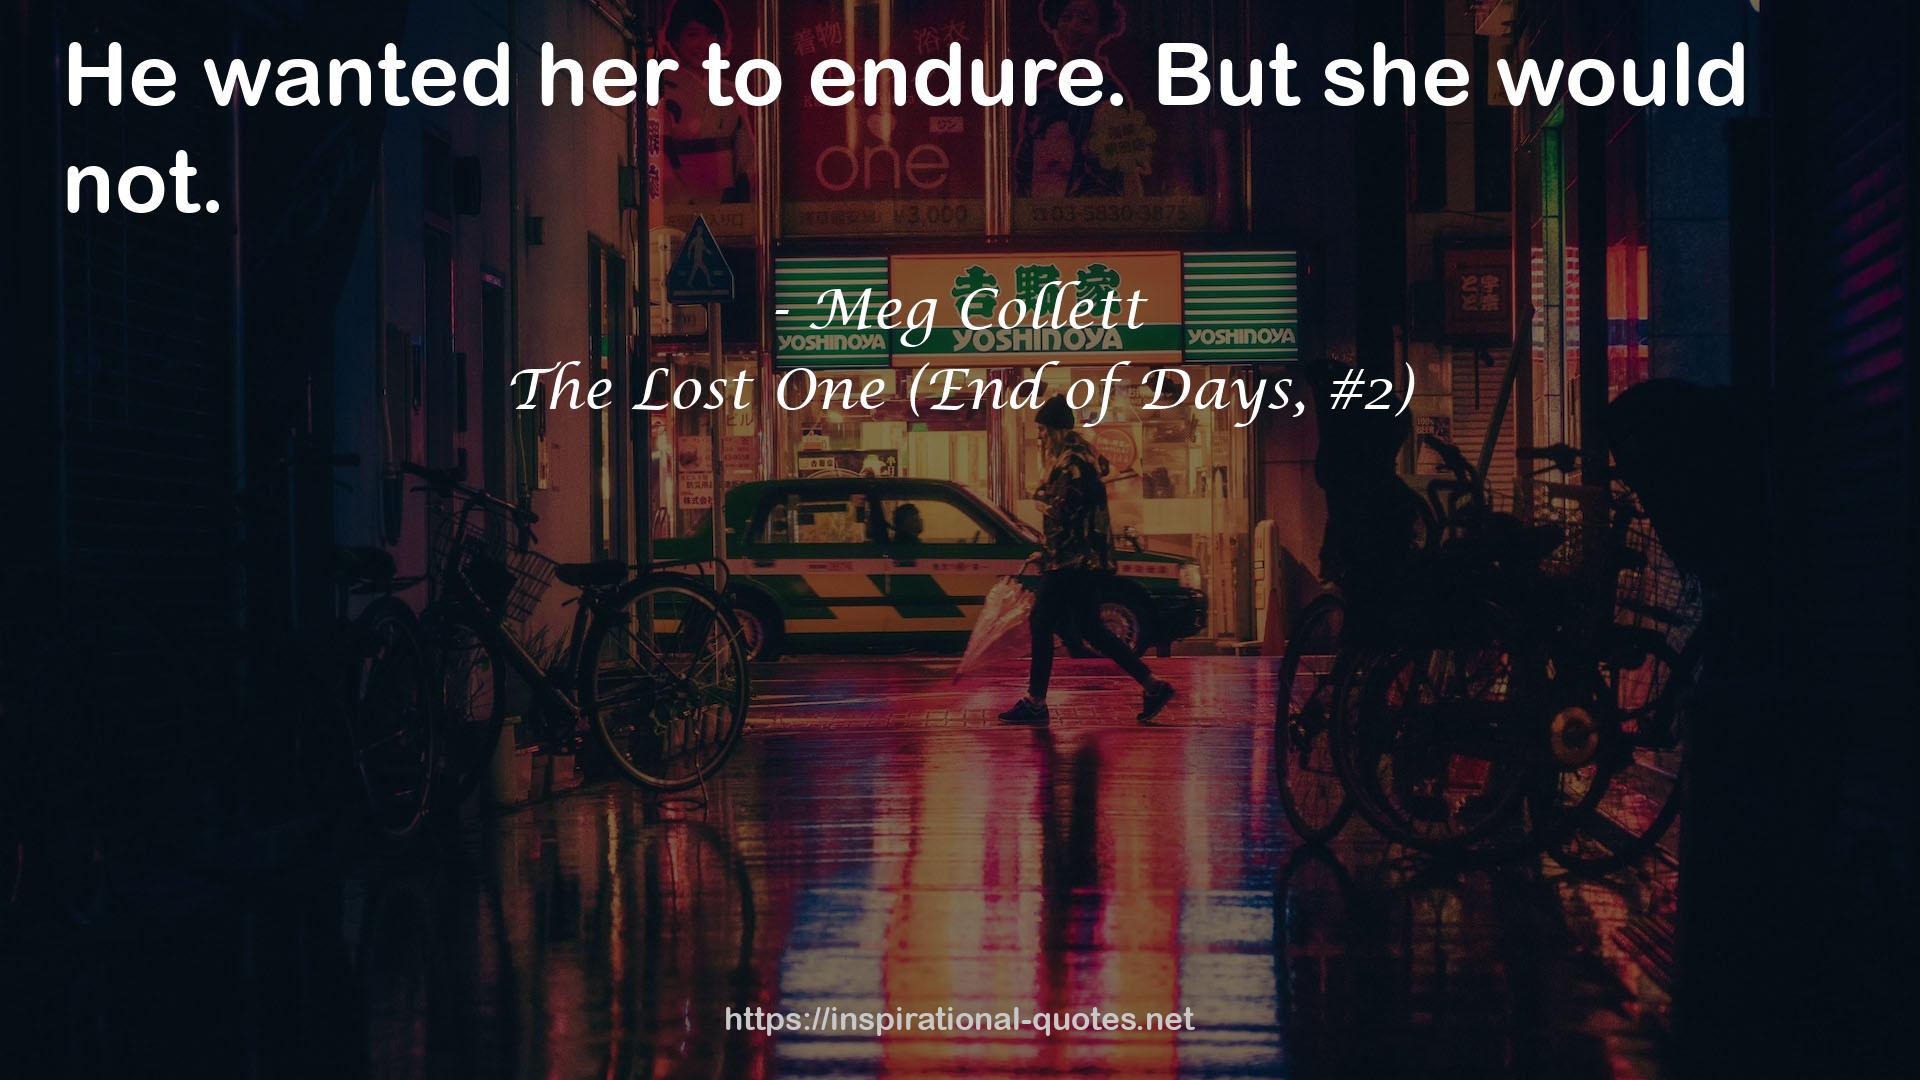 The Lost One (End of Days, #2) QUOTES